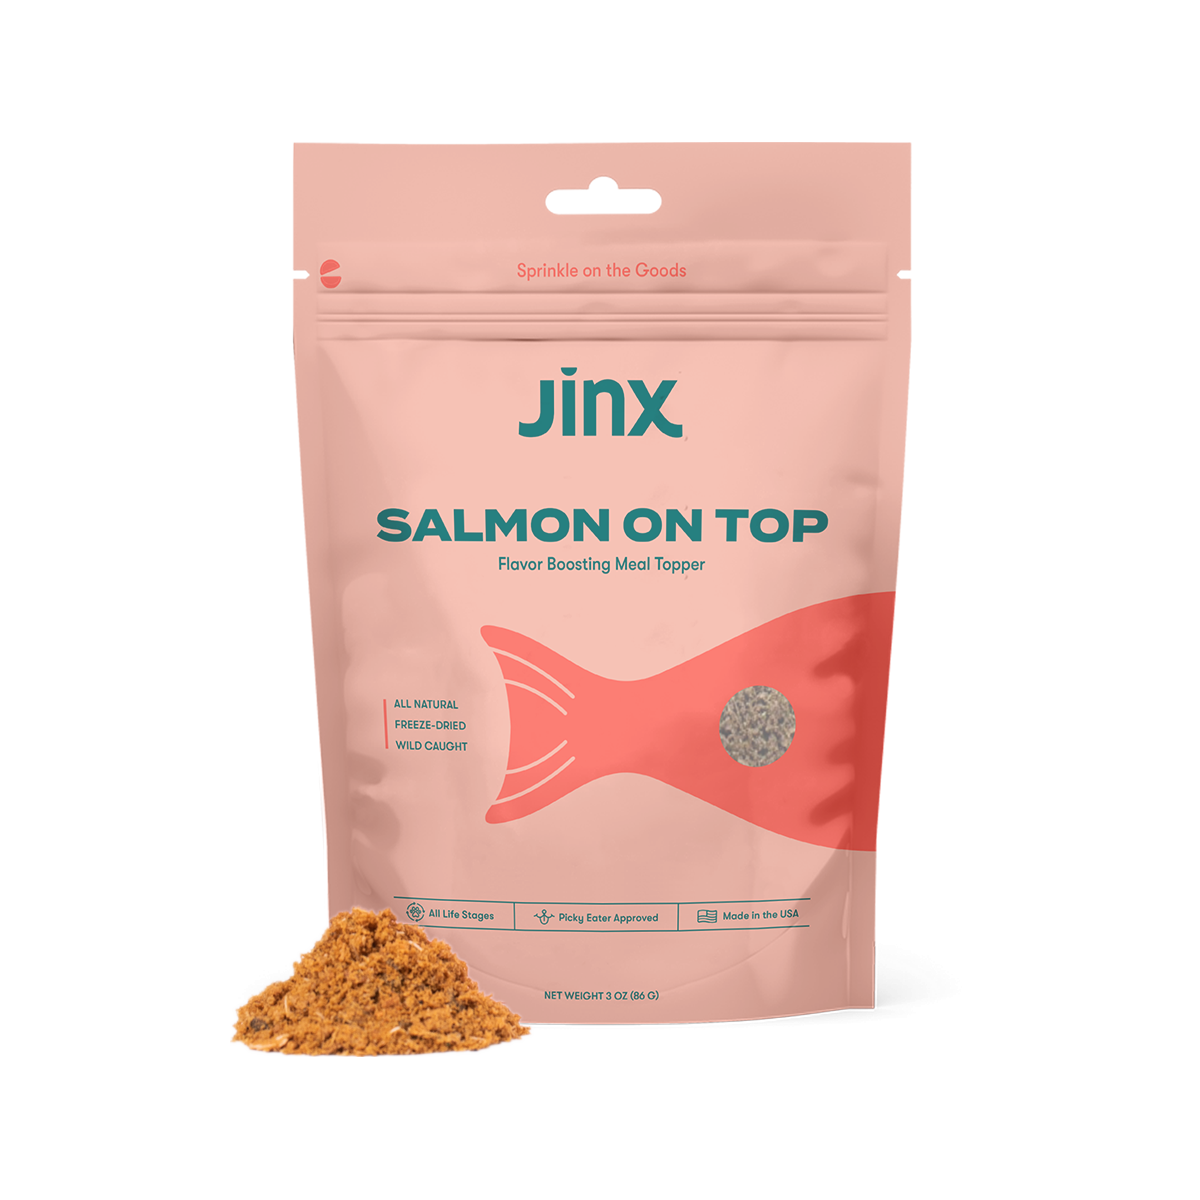 Jinx Salmon On Top Flavor Boosting Meal Topper